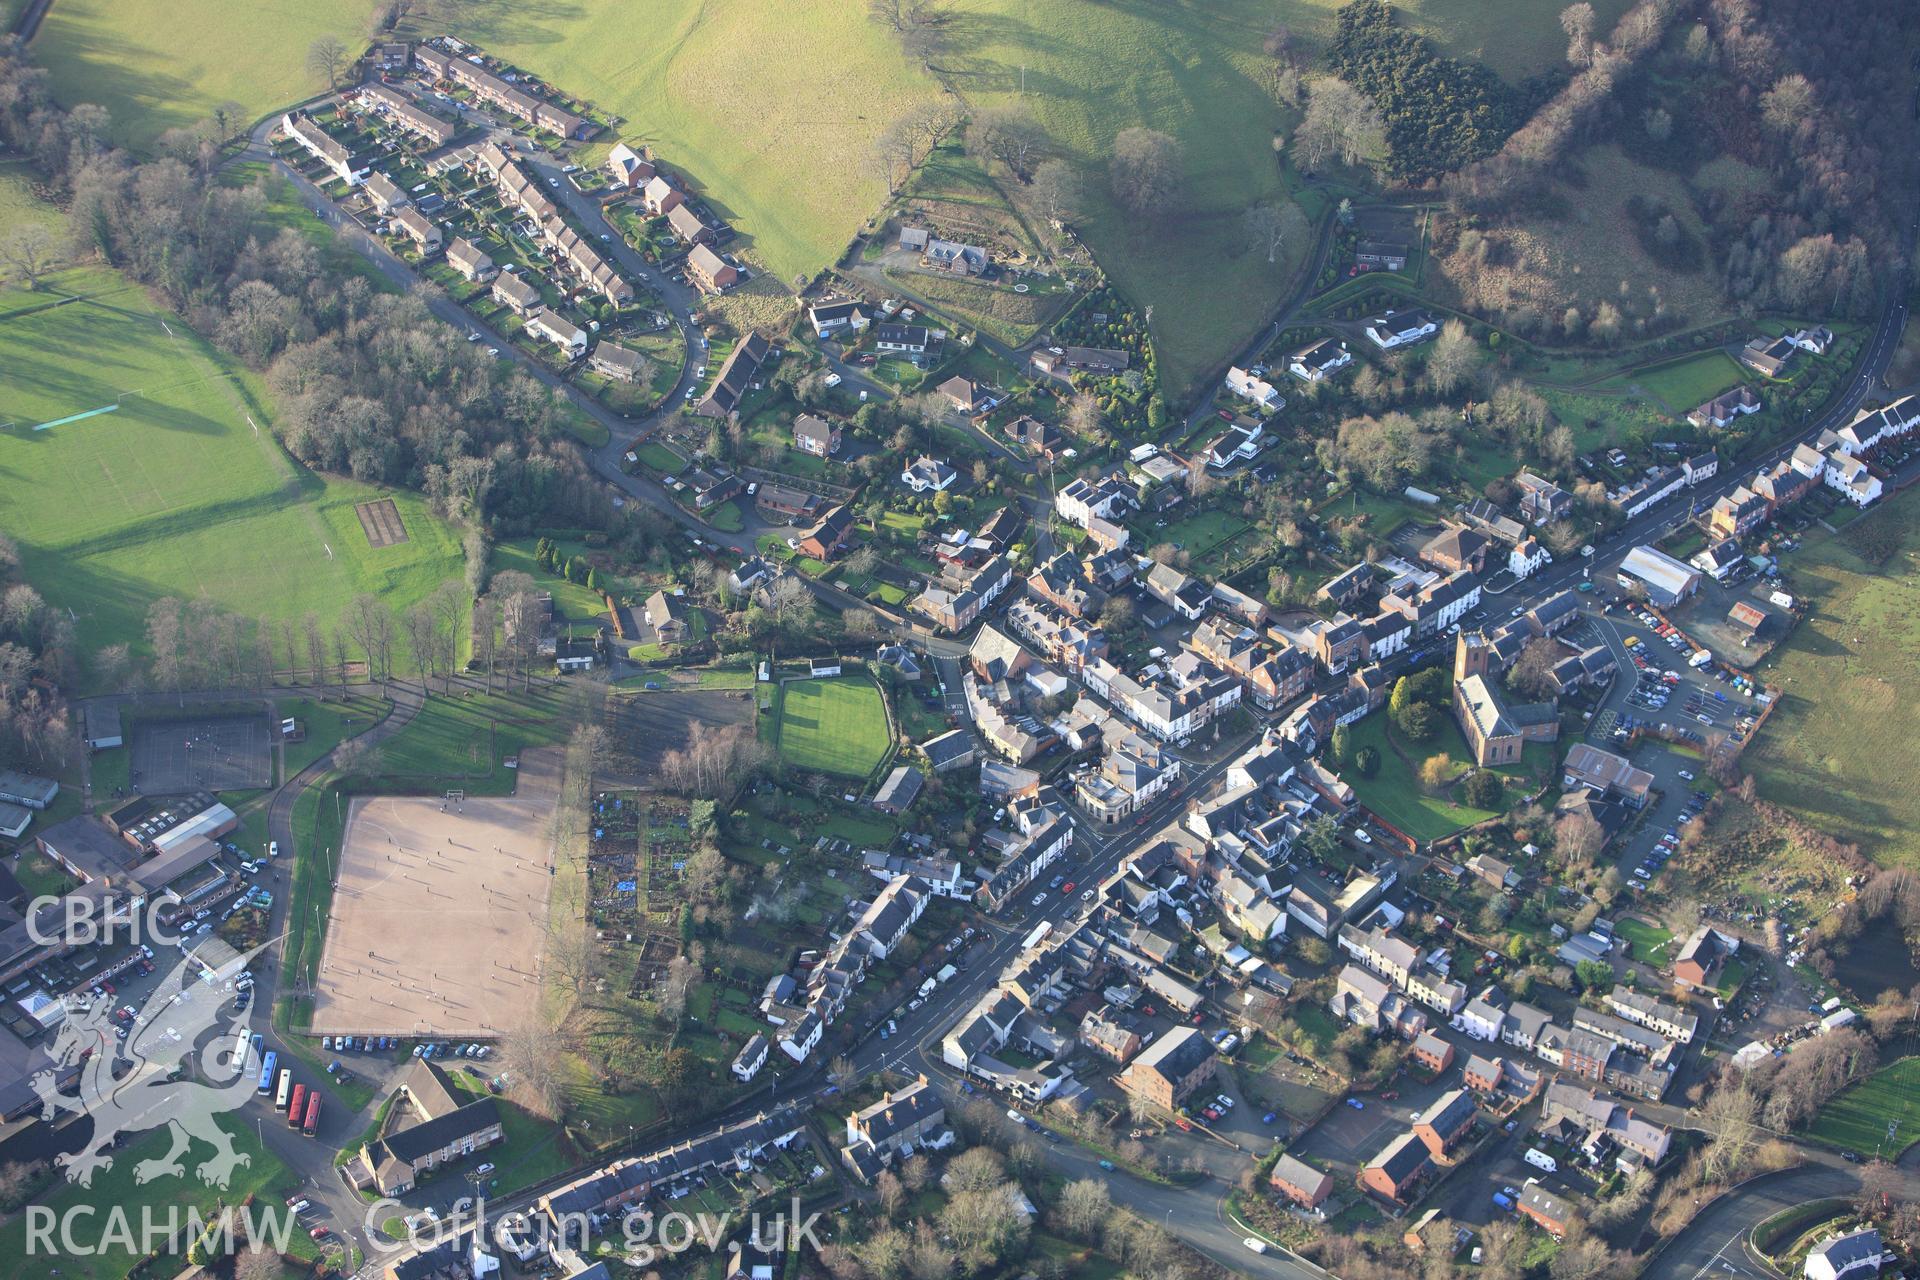 RCAHMW colour oblique aerial photograph of Llanfyllin village. Taken on 10 December 2009 by Toby Driver